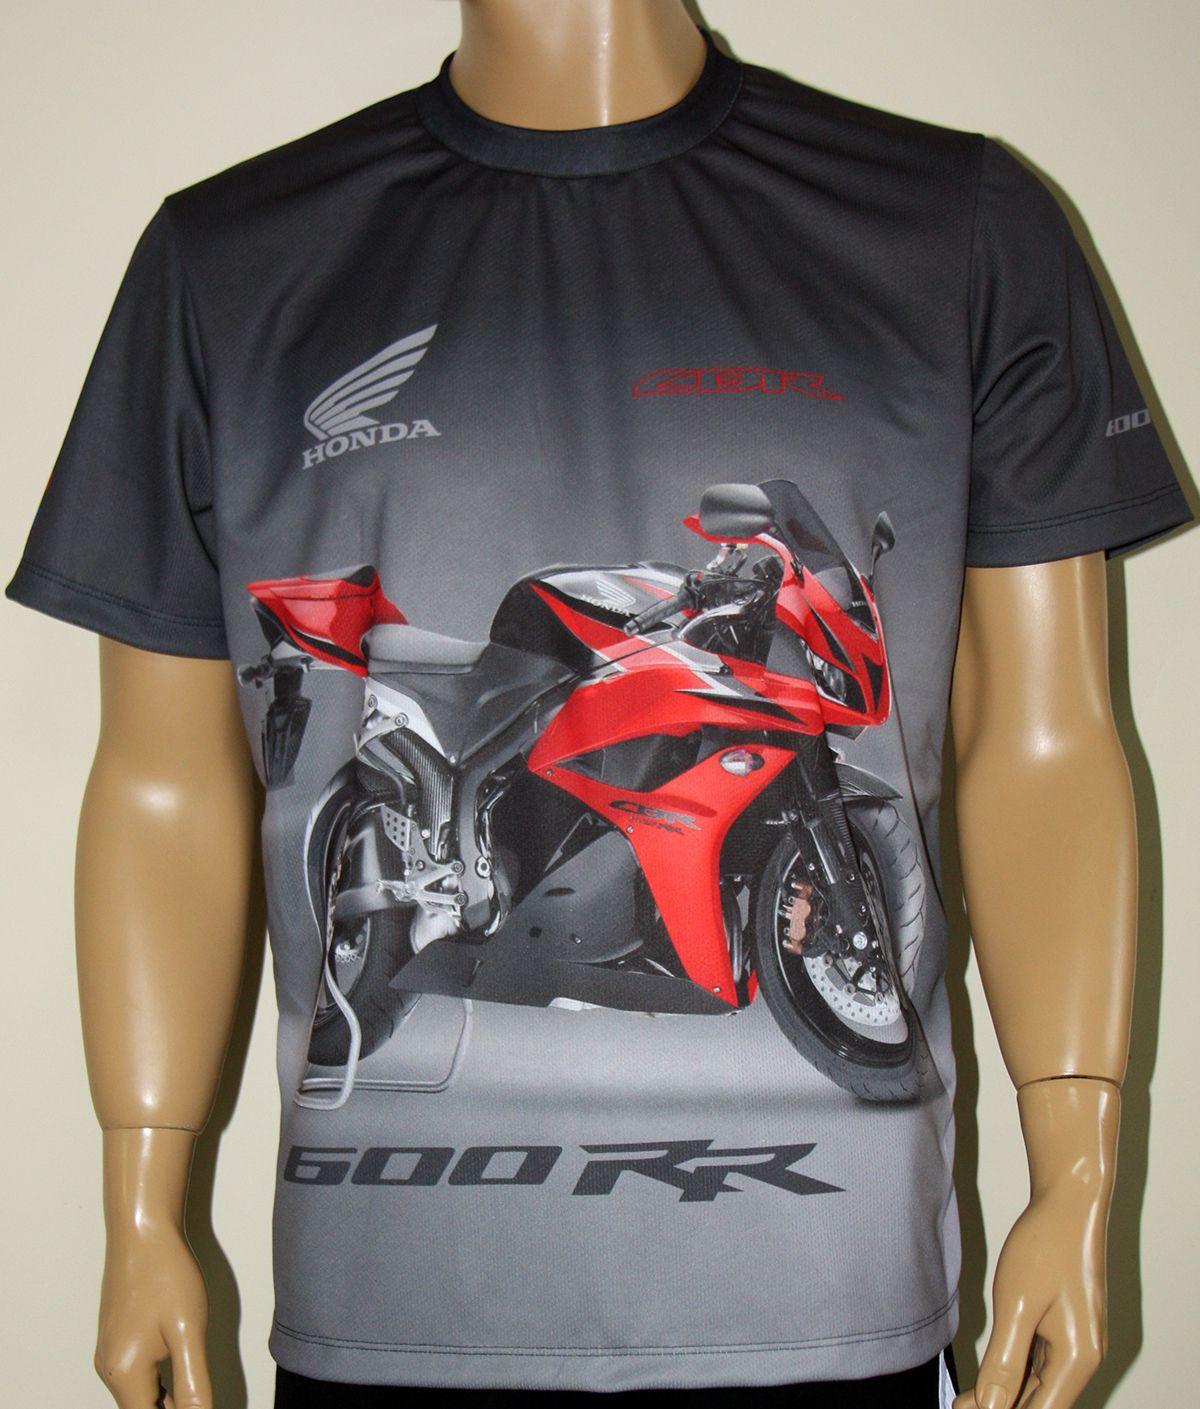 CBR 600 RR Logo - Honda CBR 600RR t-shirt with logo and all-over printed picture - T ...